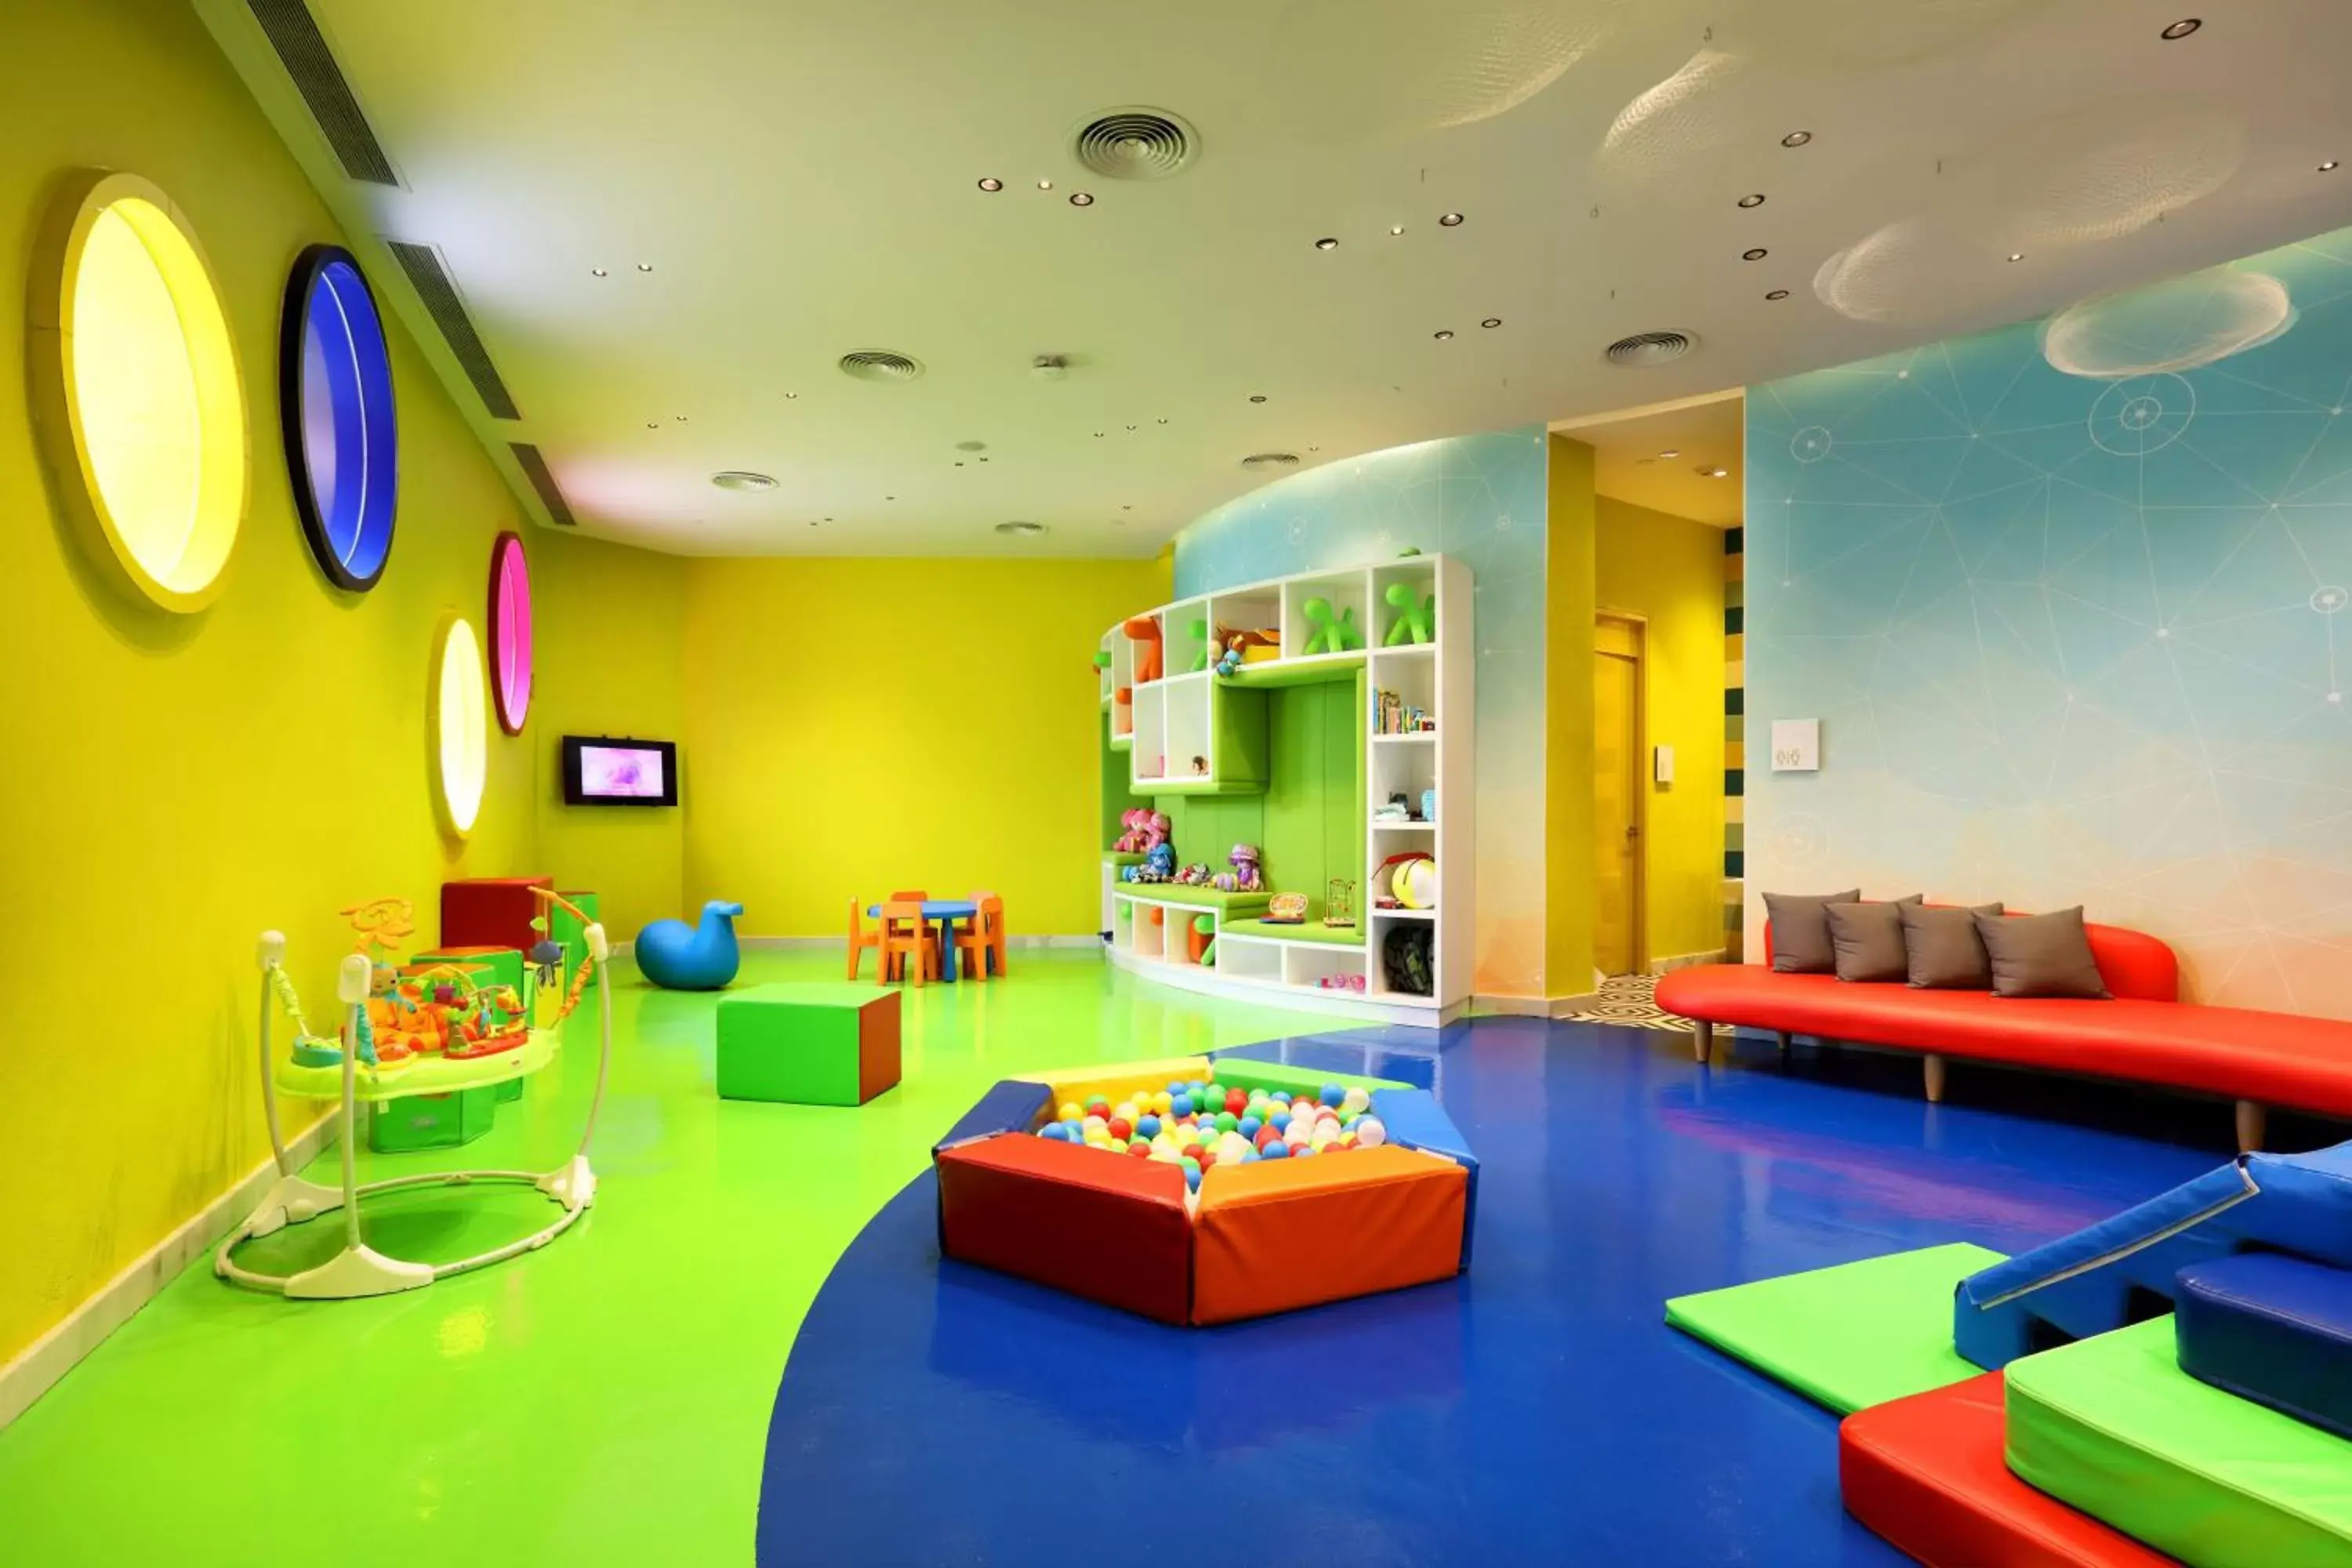 Kids's club in Family Selection at Grand Palladium Costa Mujeres Resort & Spa - All Inclusive